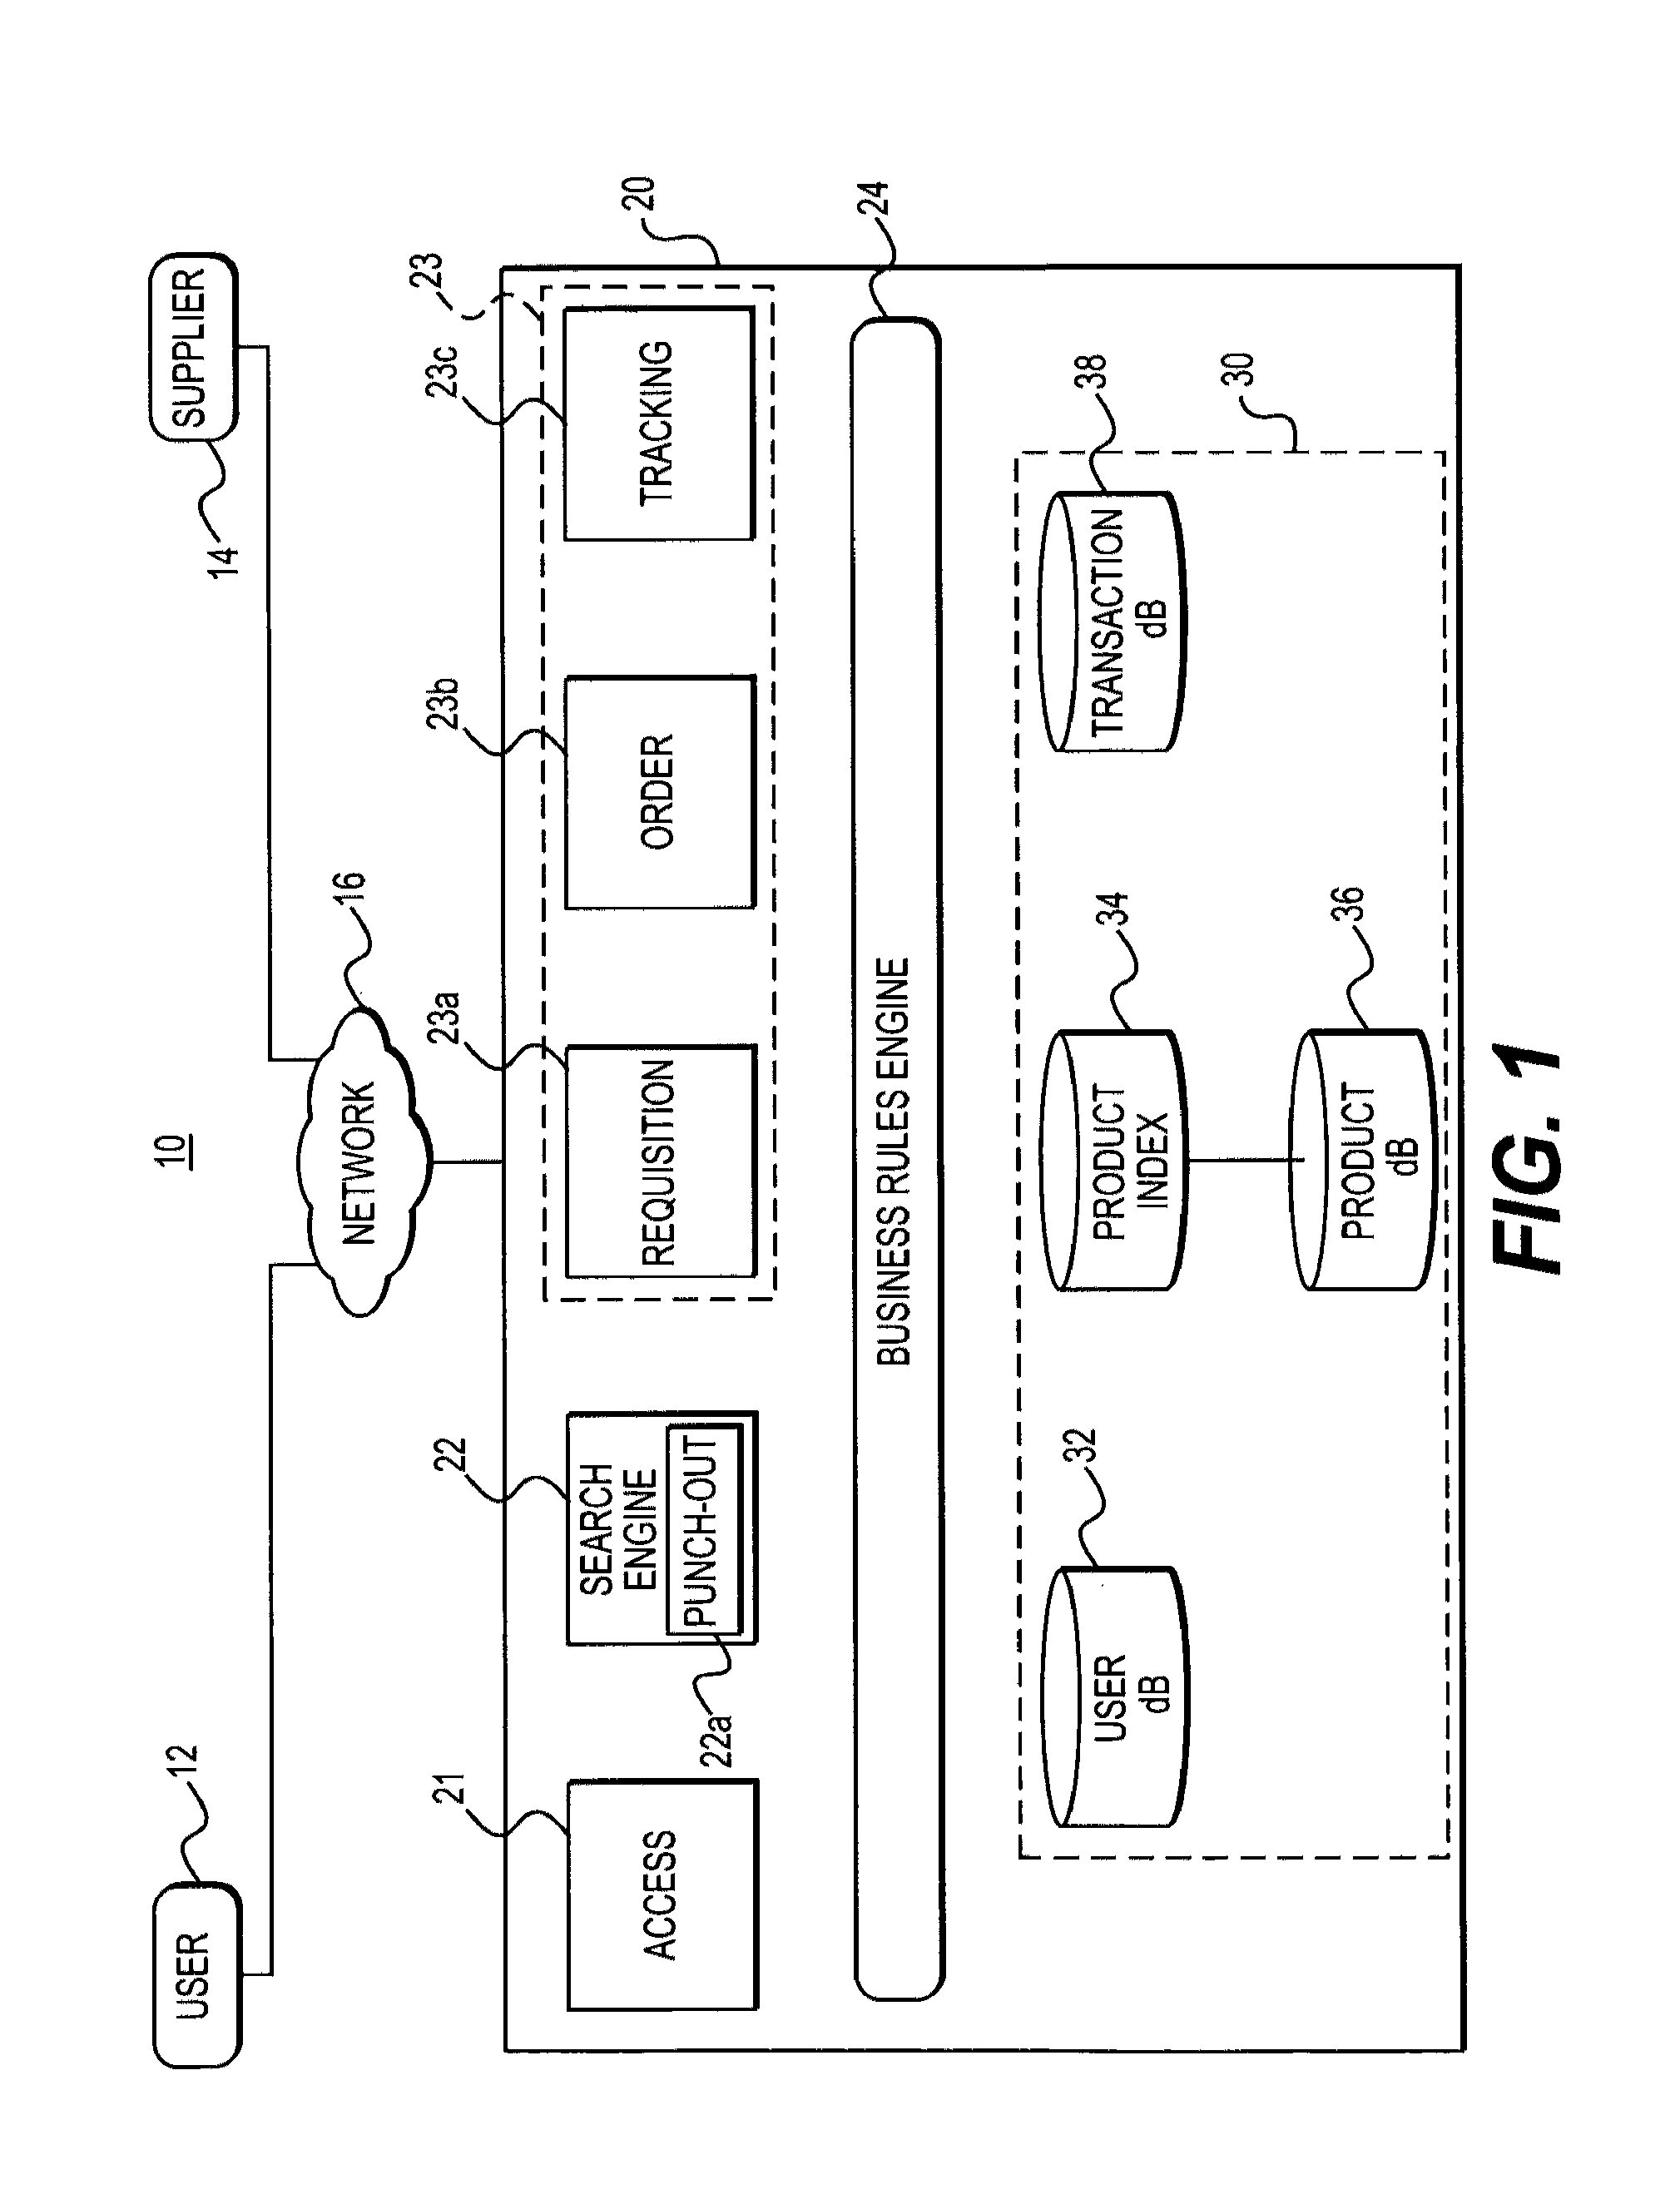 Taxonomy and data structure for an electronic procurement system